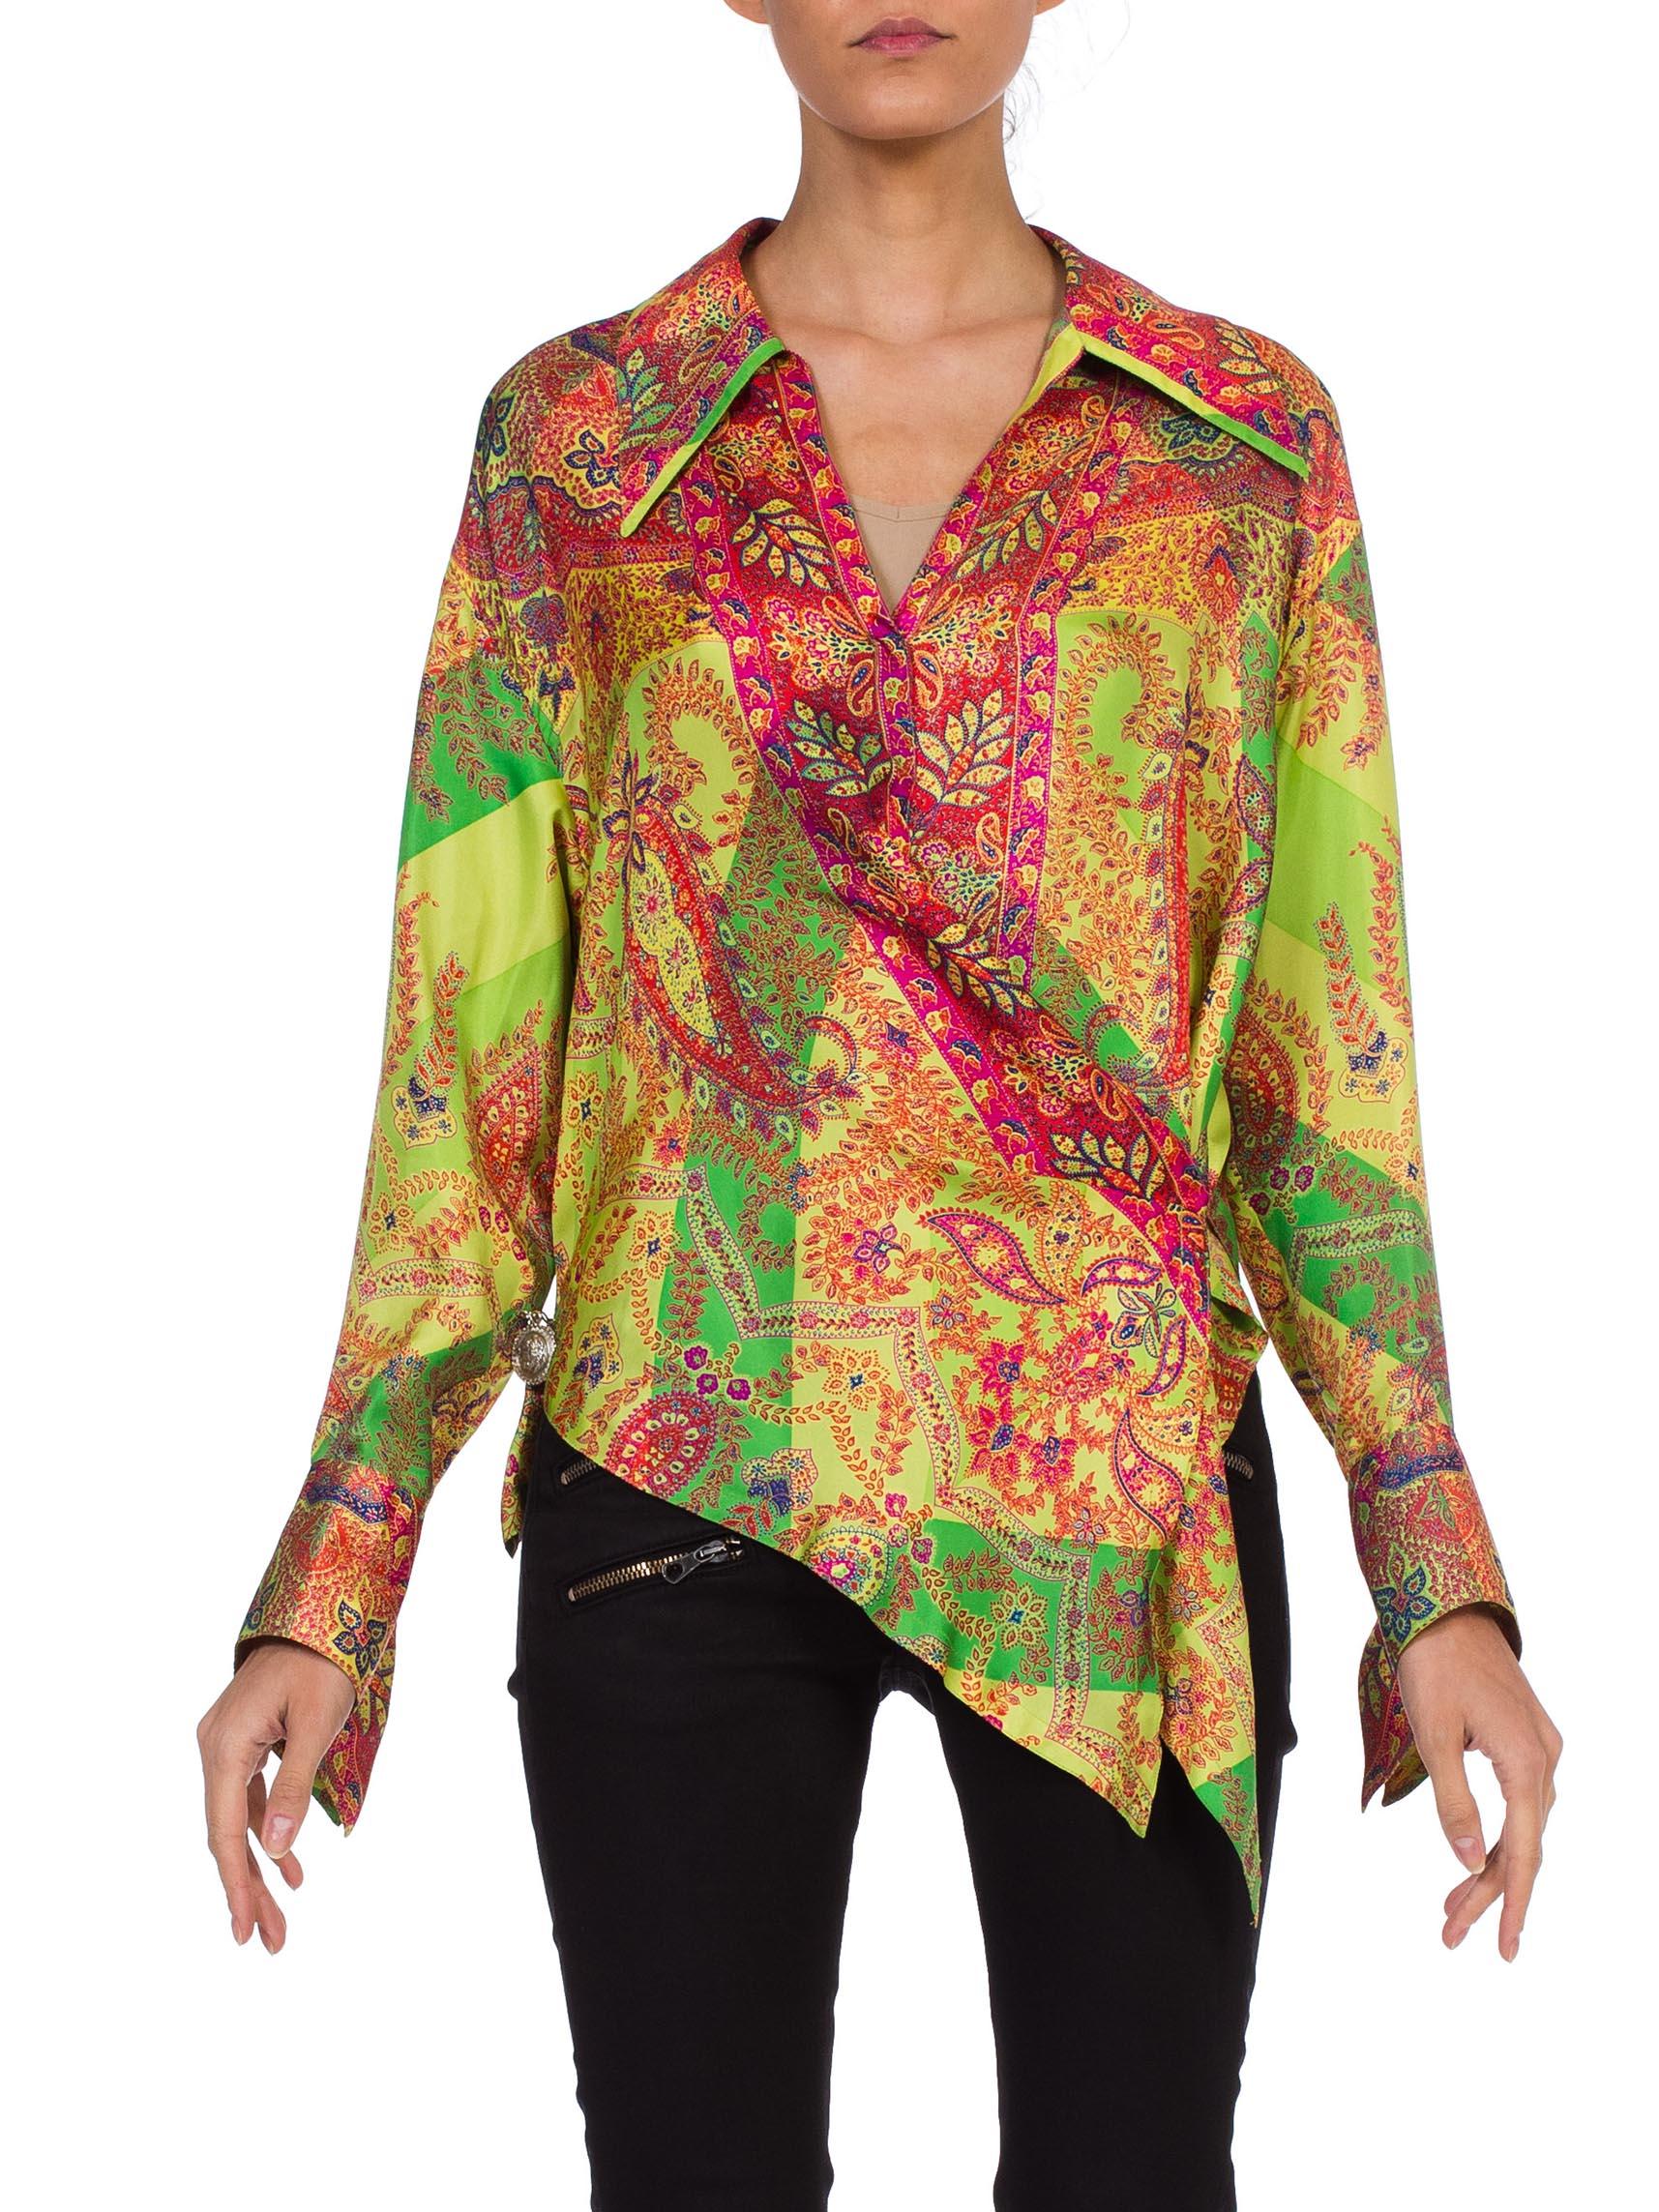 Women's 1990S GIANNI VERSACE Paisley Silk Twill Blouse From The Punk Medusa Safety Pin 